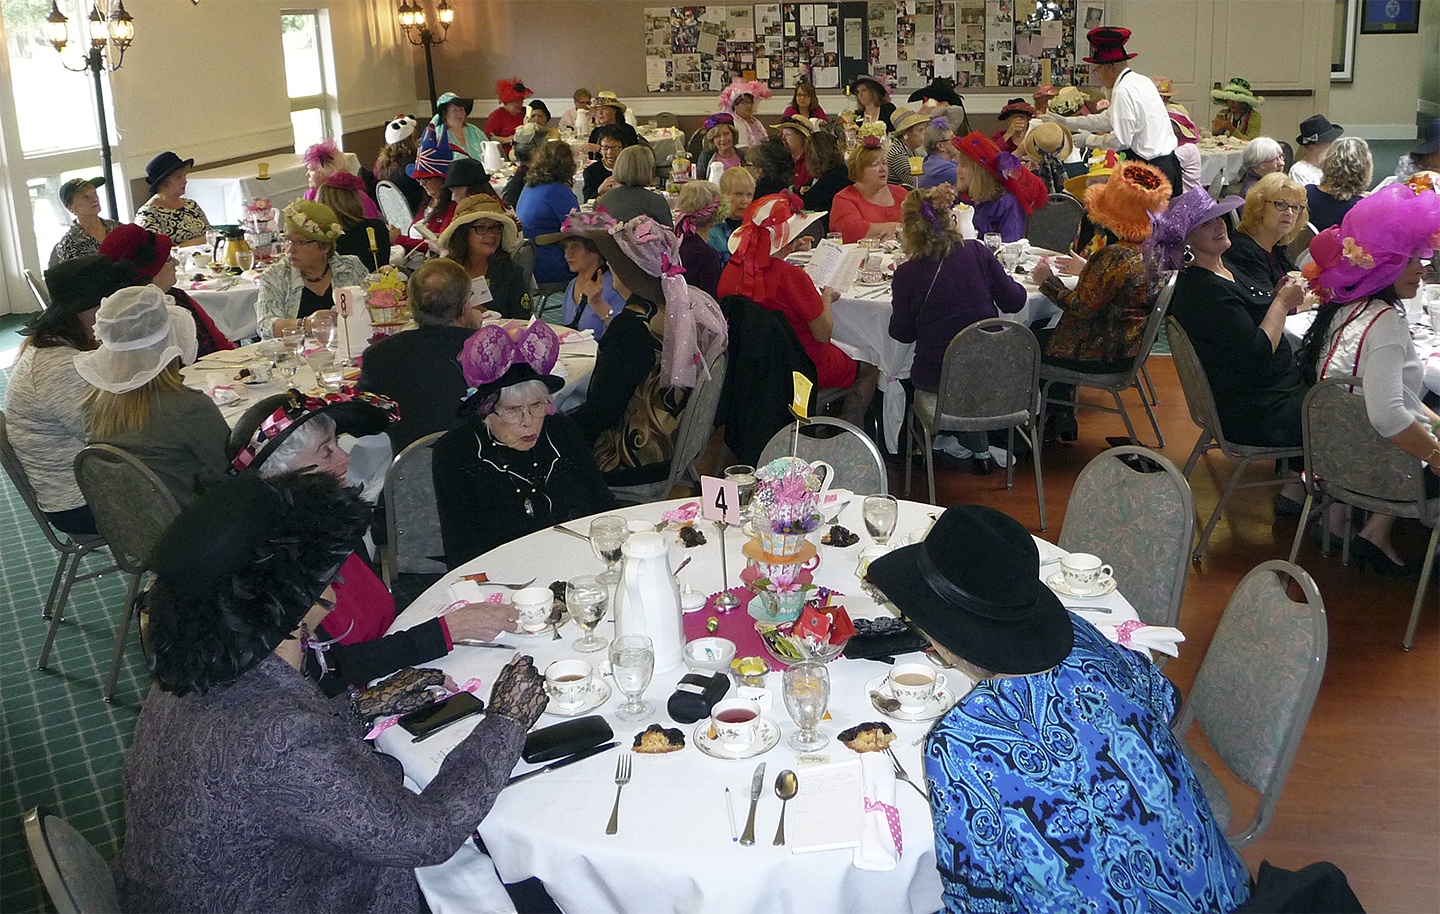 A sea of wild and colorful hats filled the dining room at Sunland Golf & Country Club for the 19th annual Mad Hatters Tea Party on Oct. 7. Sequim Gazette photos by Patricia Morrison Coate